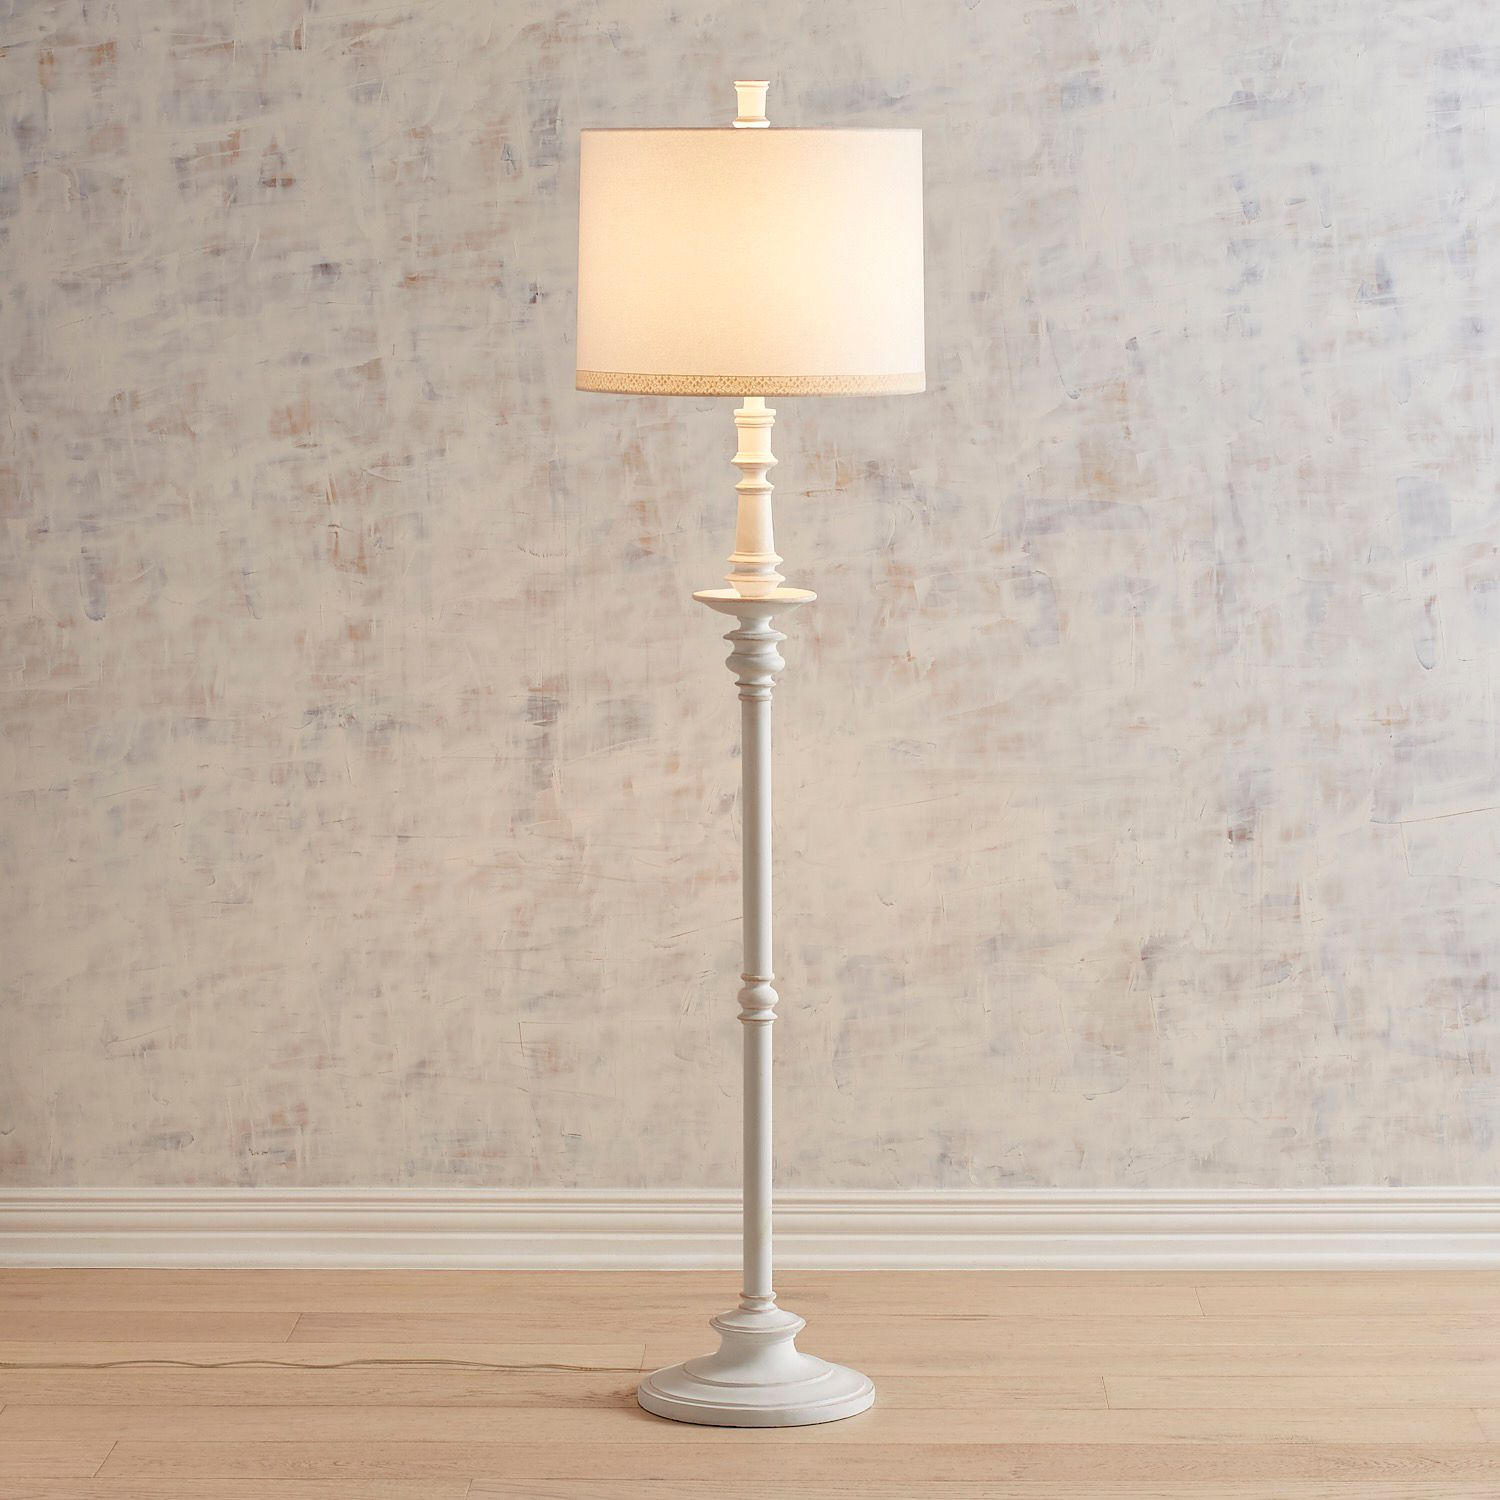 Claire Whitewashed Floor Lamp Lighting Floor Lamps for size 1500 X 1500